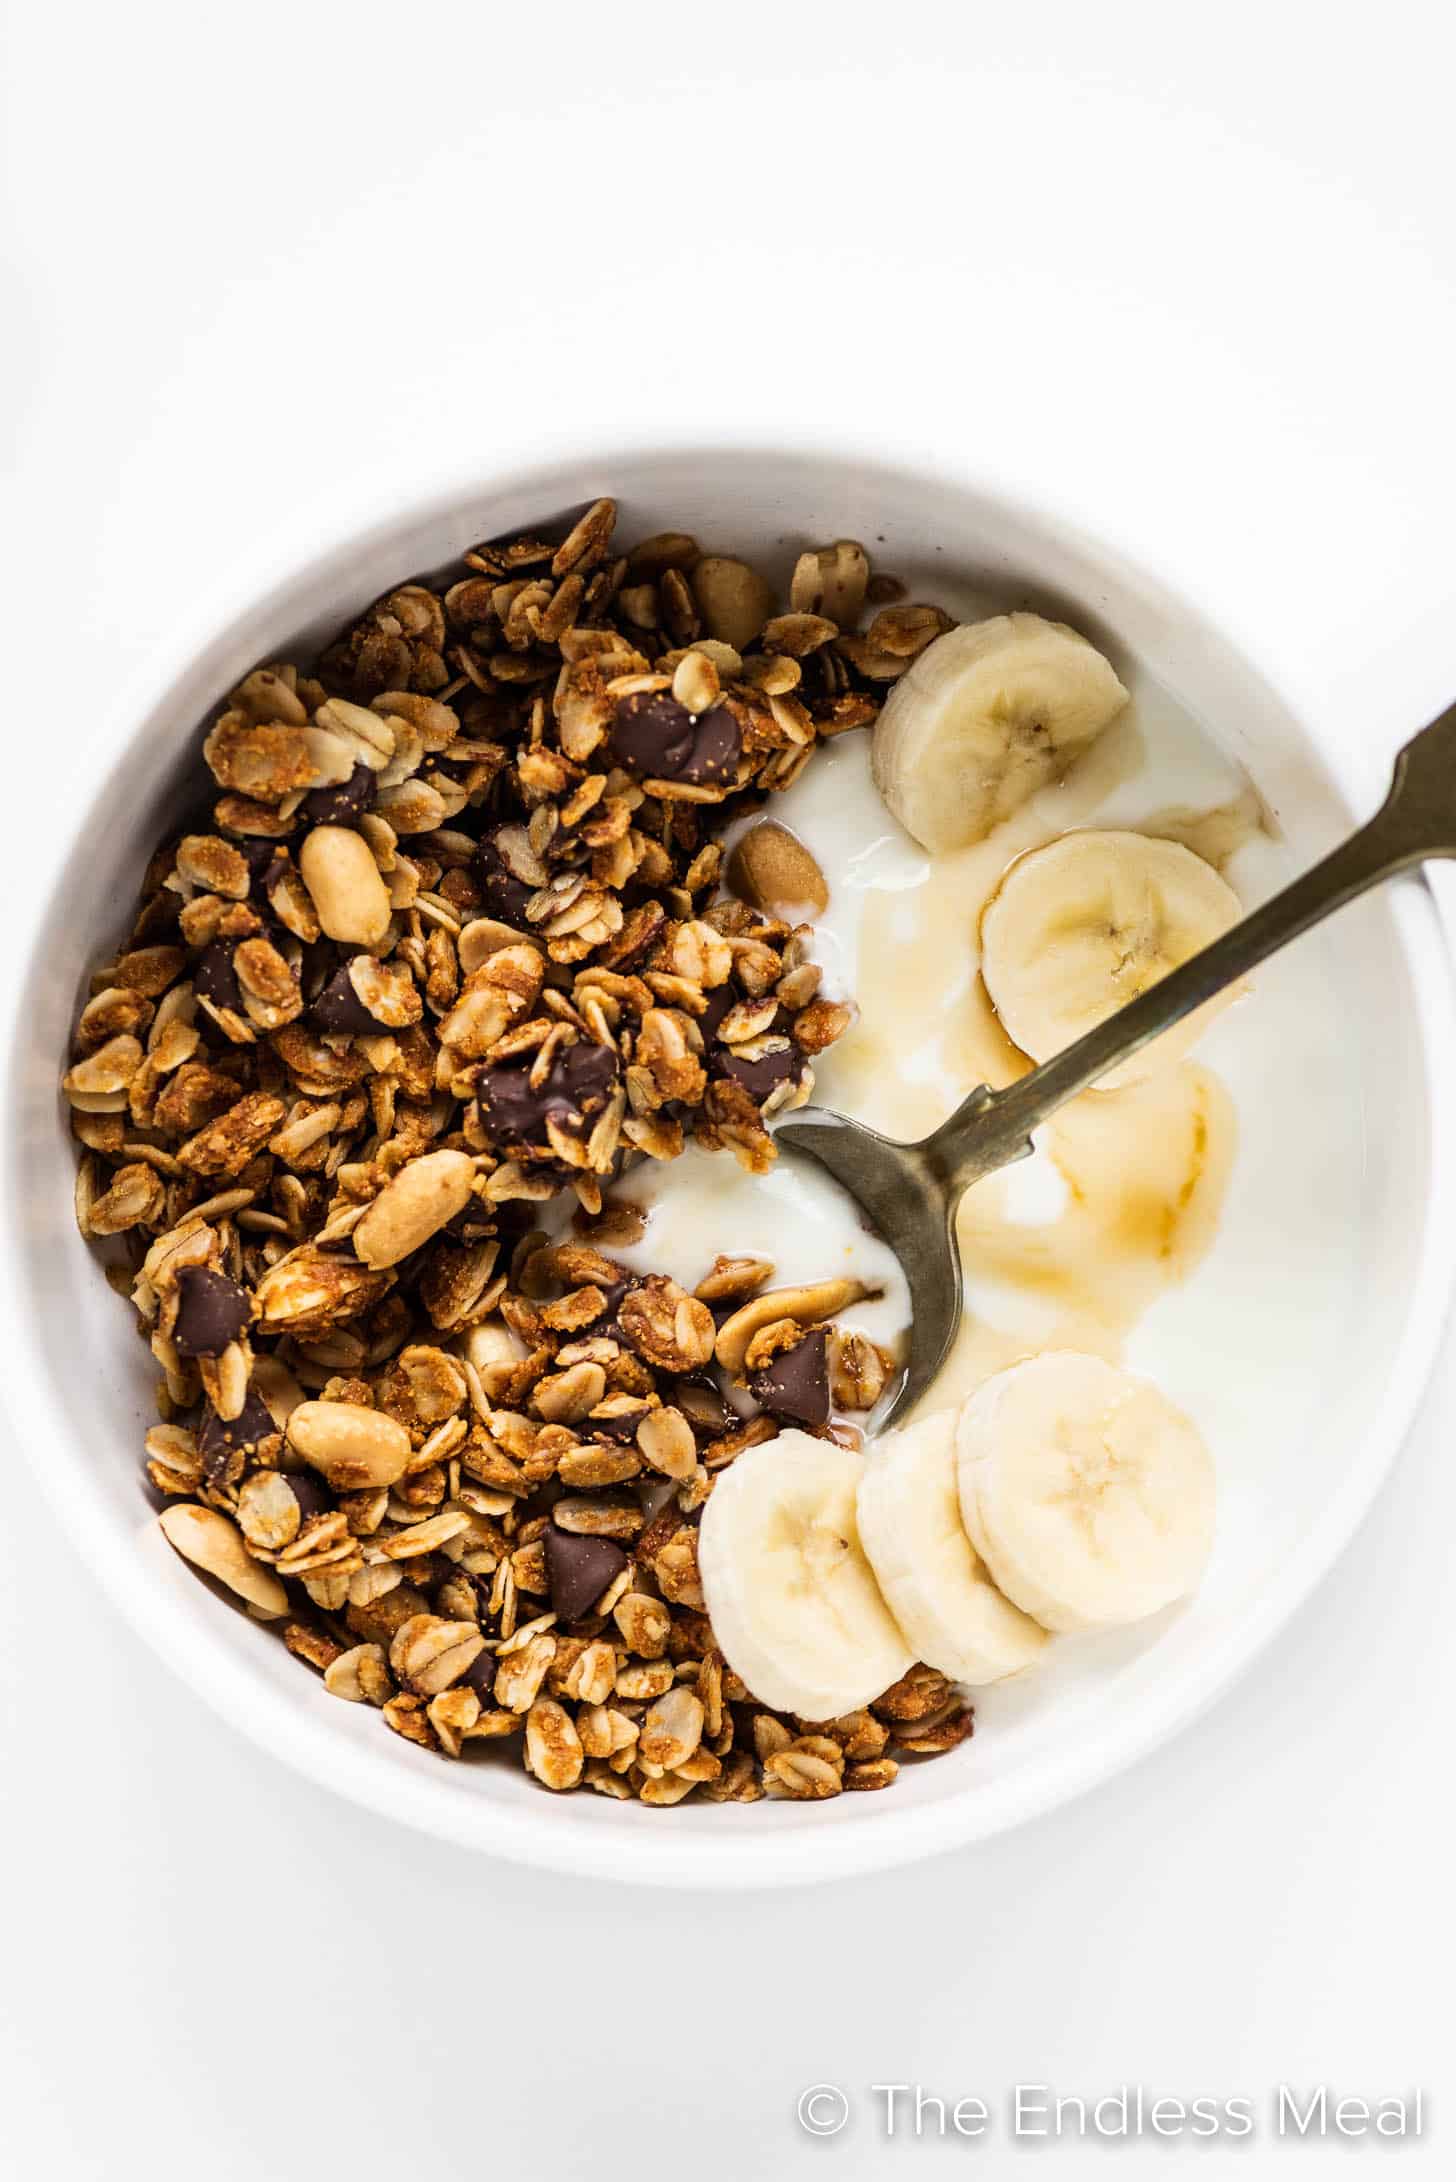 Peanut Butter Granola in a cereal bowl with yogurt and bananas